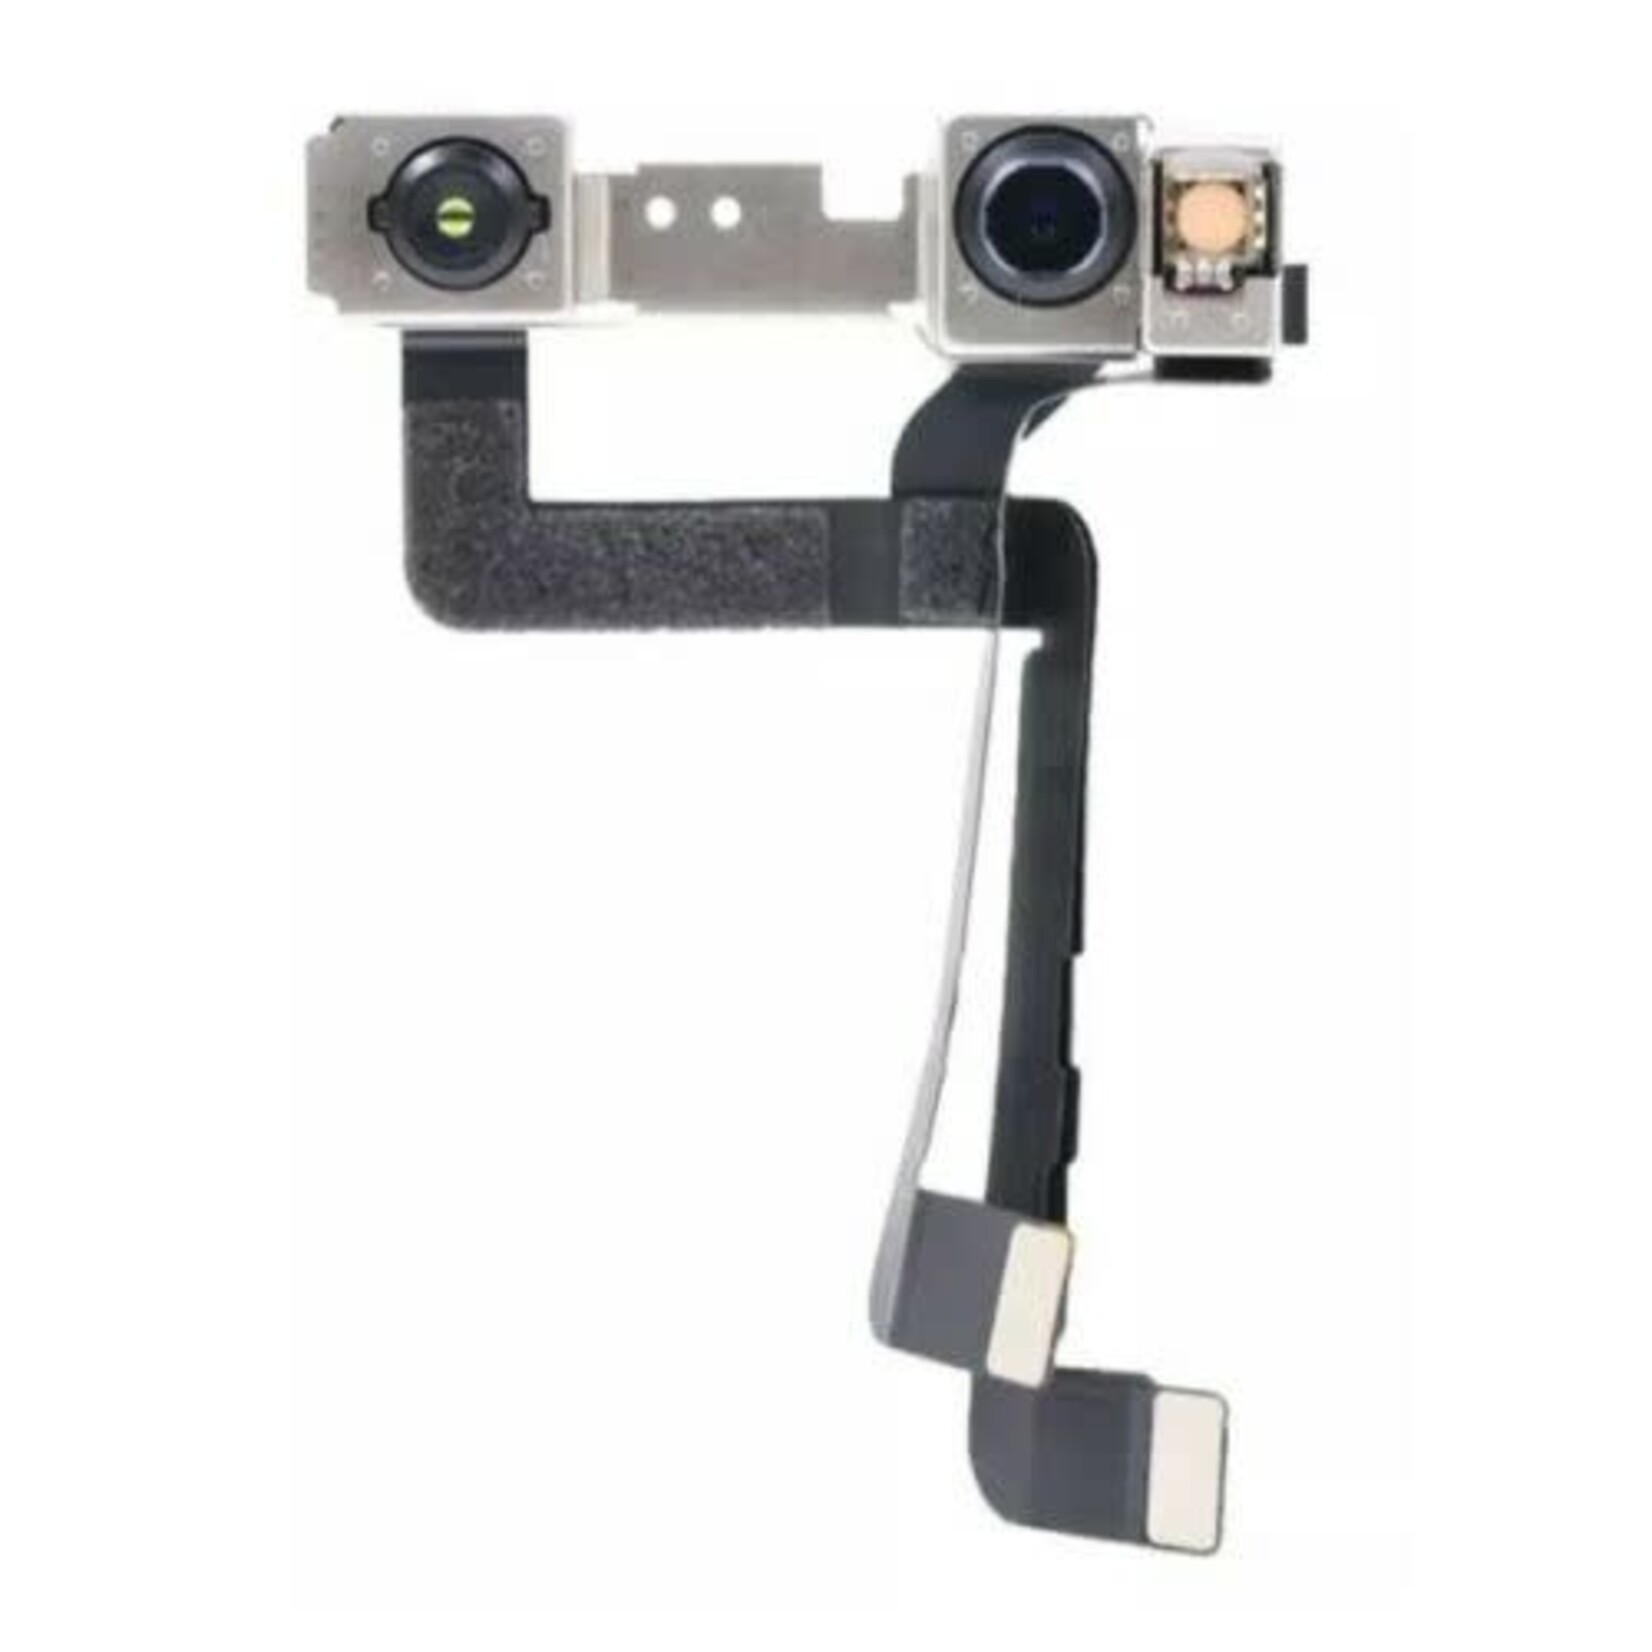 Apple FRONT CAMERA MODULE WITH FLEX CABLE COMPATIBLE FOR IPHONE 11 PRO MAX